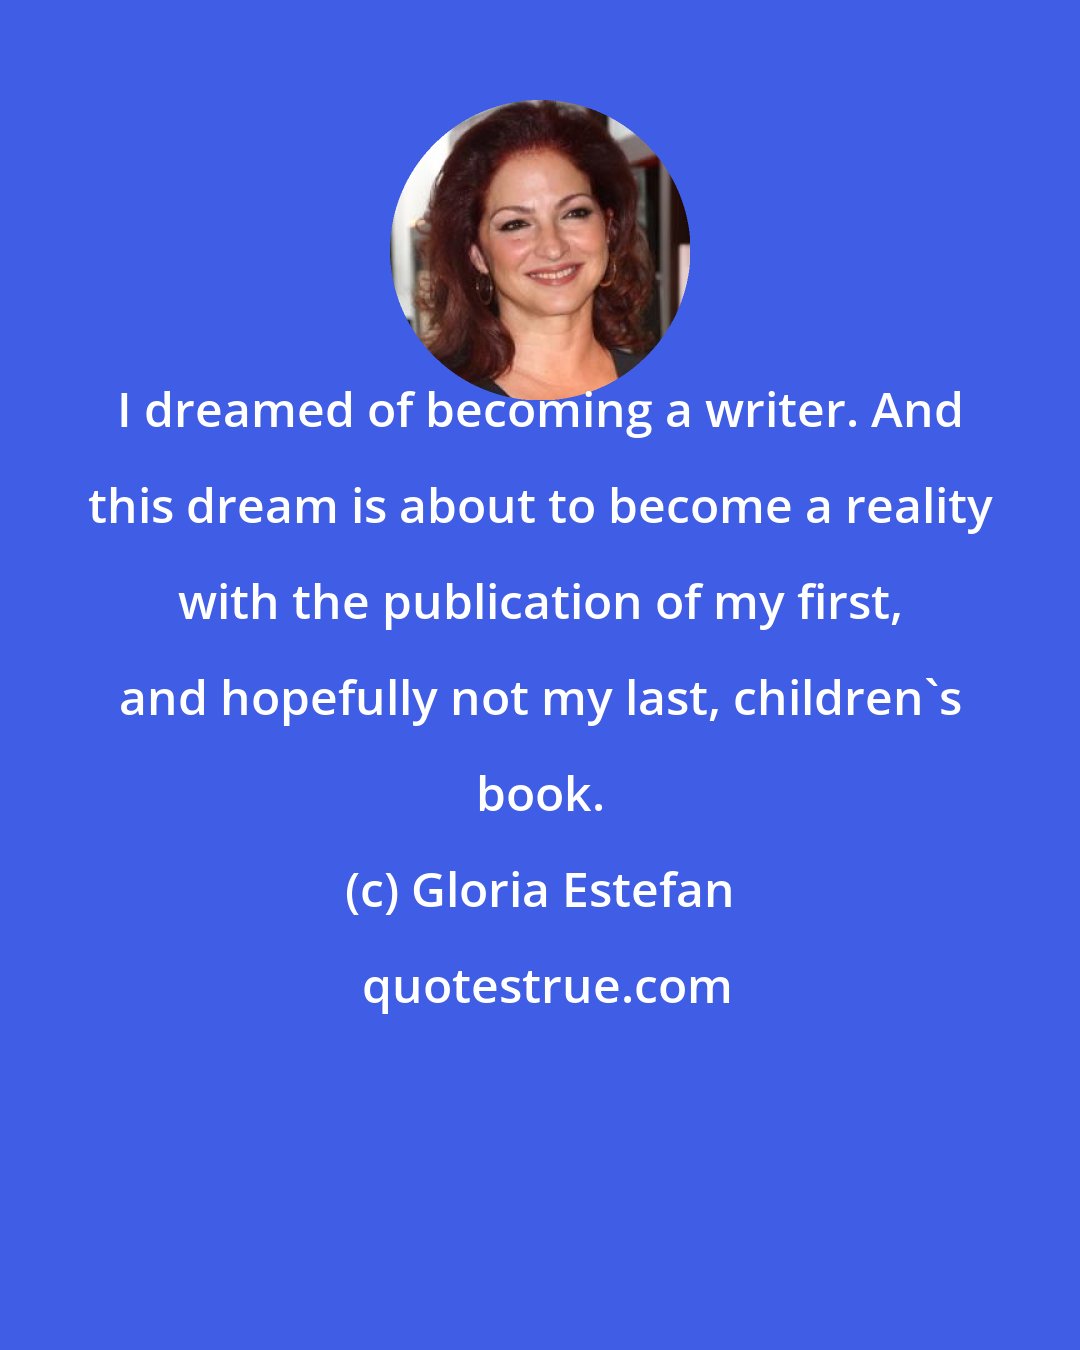 Gloria Estefan: I dreamed of becoming a writer. And this dream is about to become a reality with the publication of my first, and hopefully not my last, children's book.